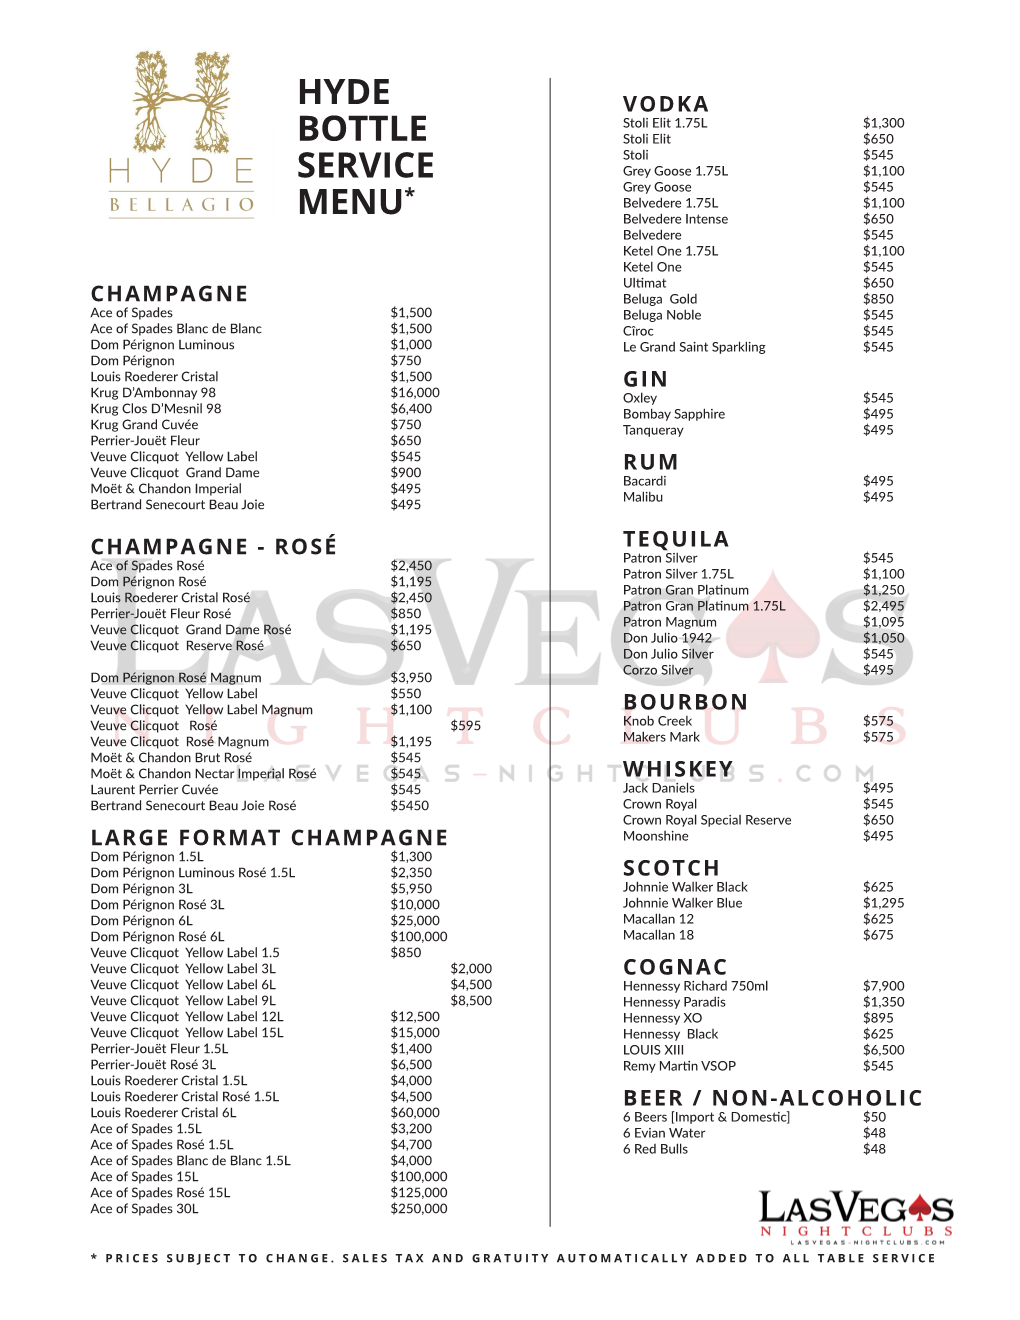 View the Hyde Bottle Service Menu for Champagne, Wine & Liquor Prices